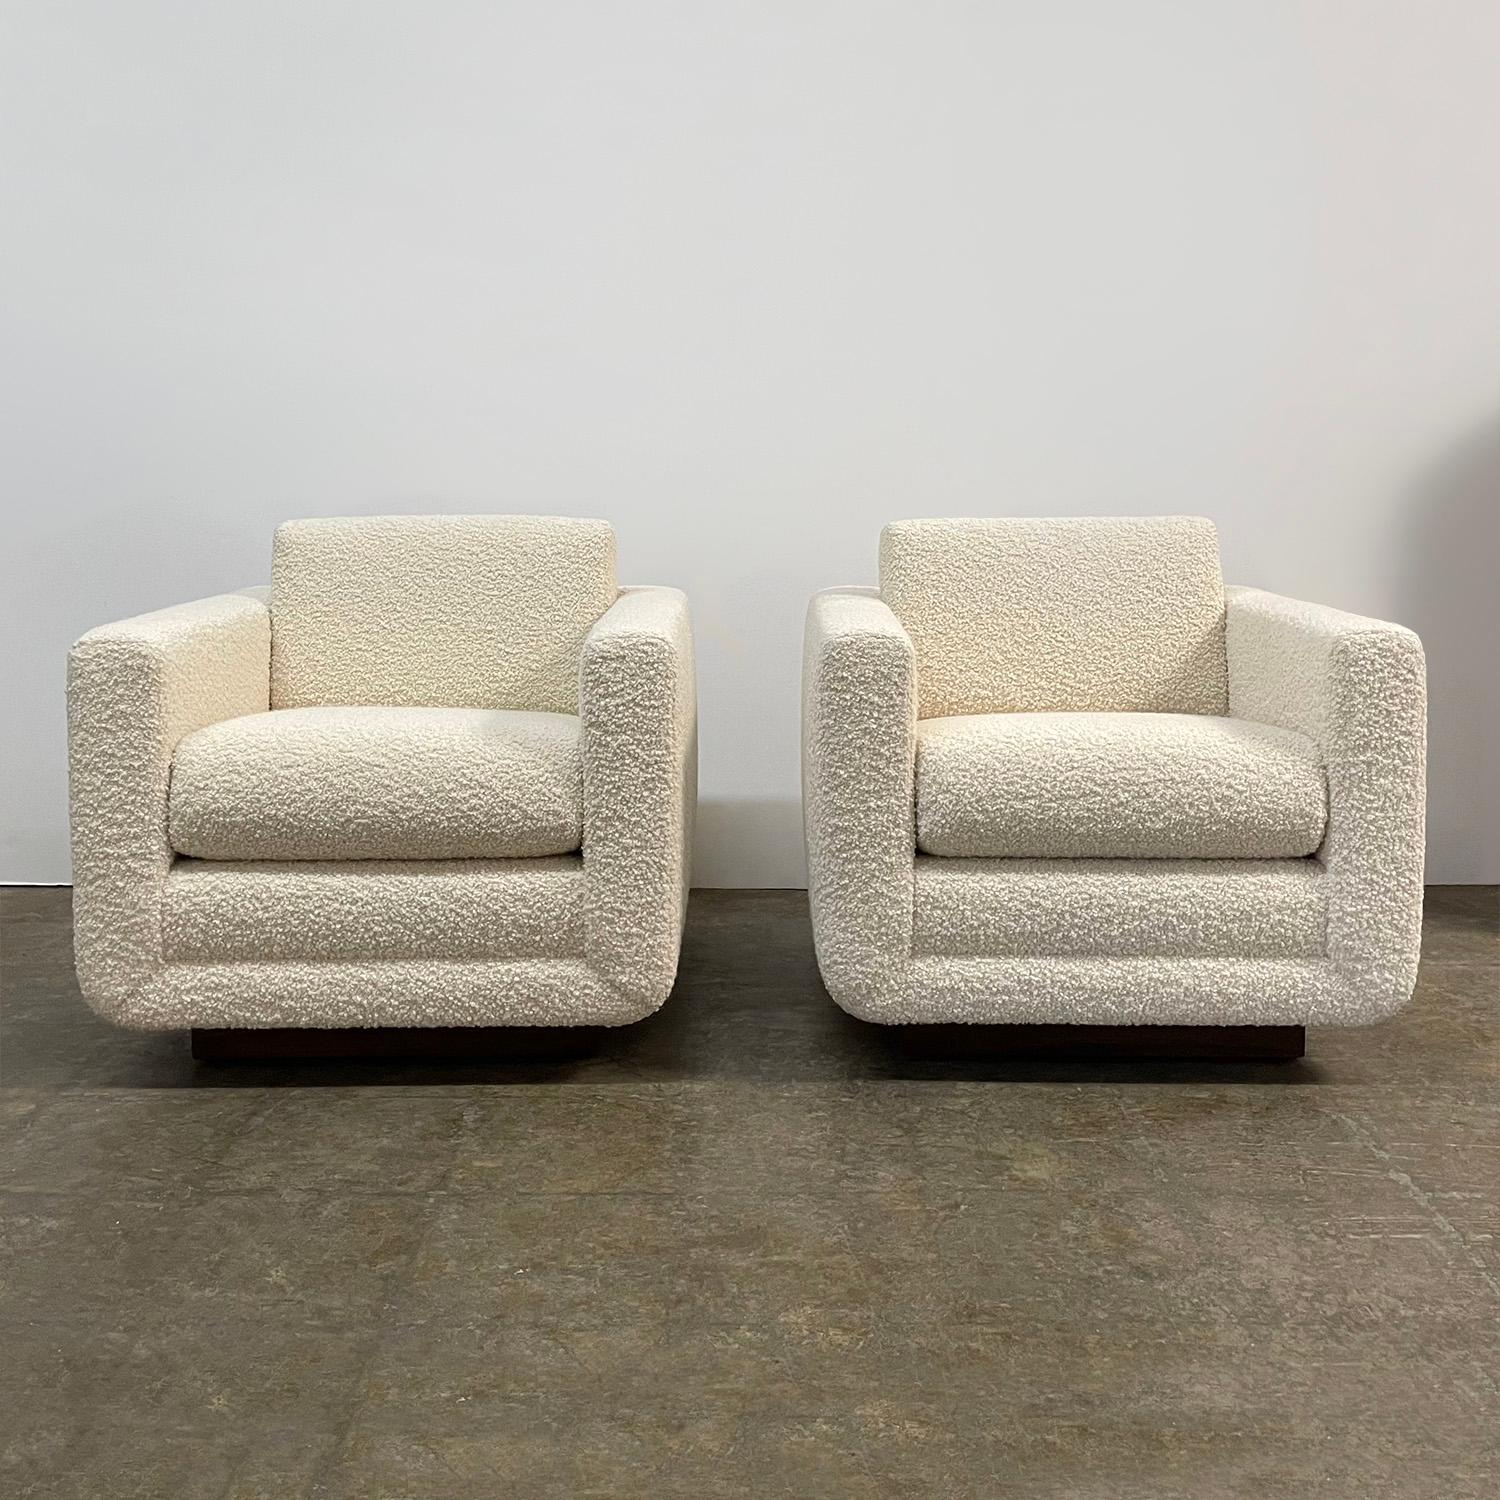 Pair of Harvey Probber club chairs
America, circa 1960’s
Comfy yet stylish with great lines and design 
Newly reupholstered in buttery soft wool boucle
Reconditioned walnut plinth base
*We have a modified version of this chair available for new